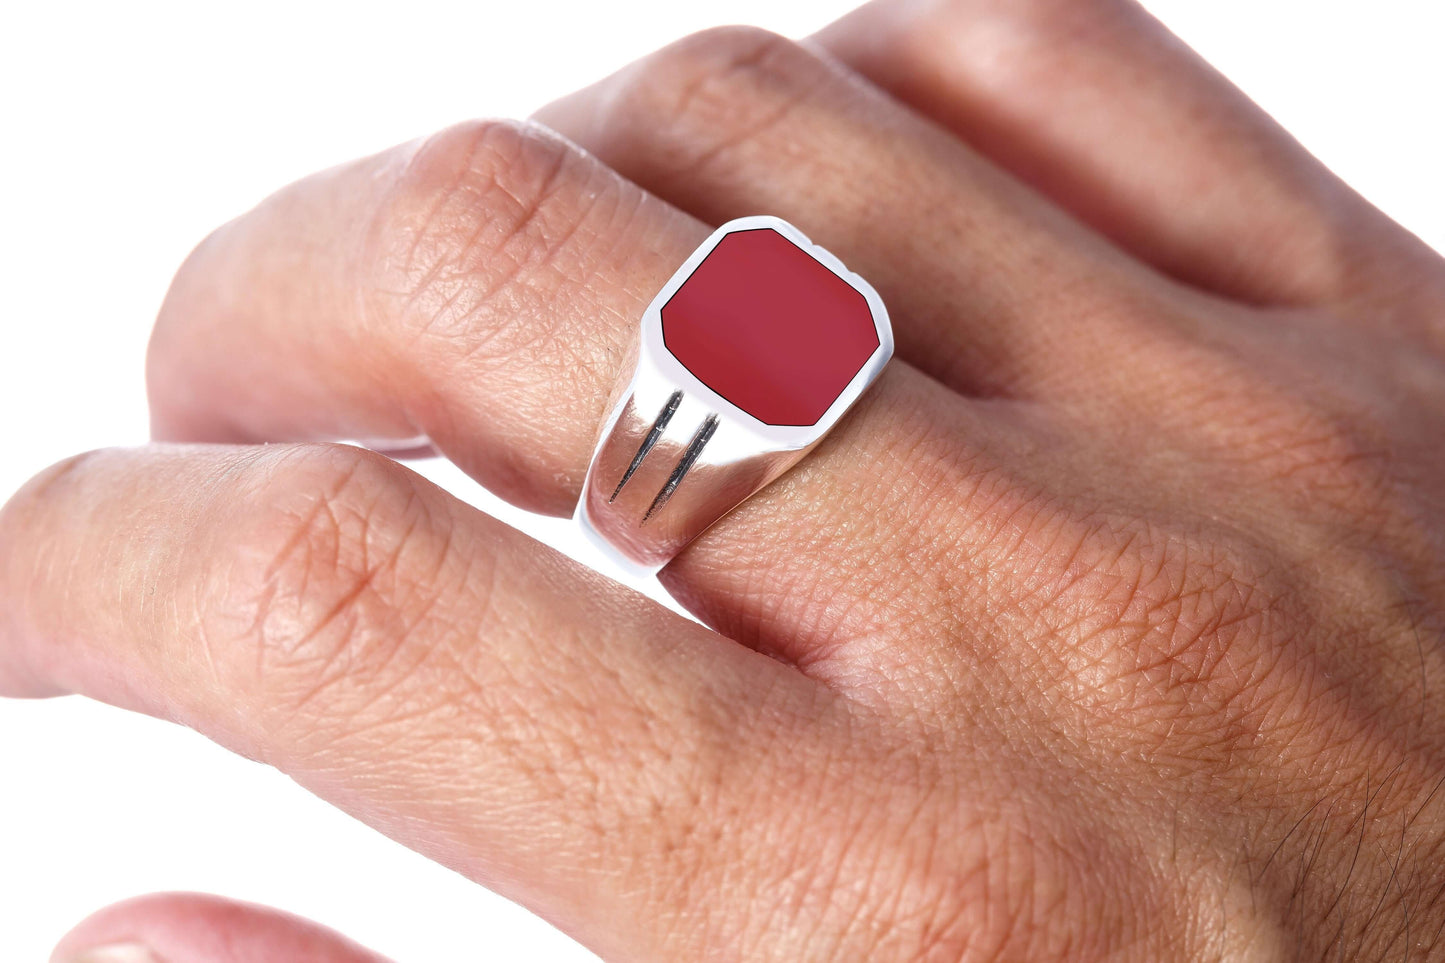 925 Sterling Silver Mens Carnelian Classic Band Ring - SilverMania925